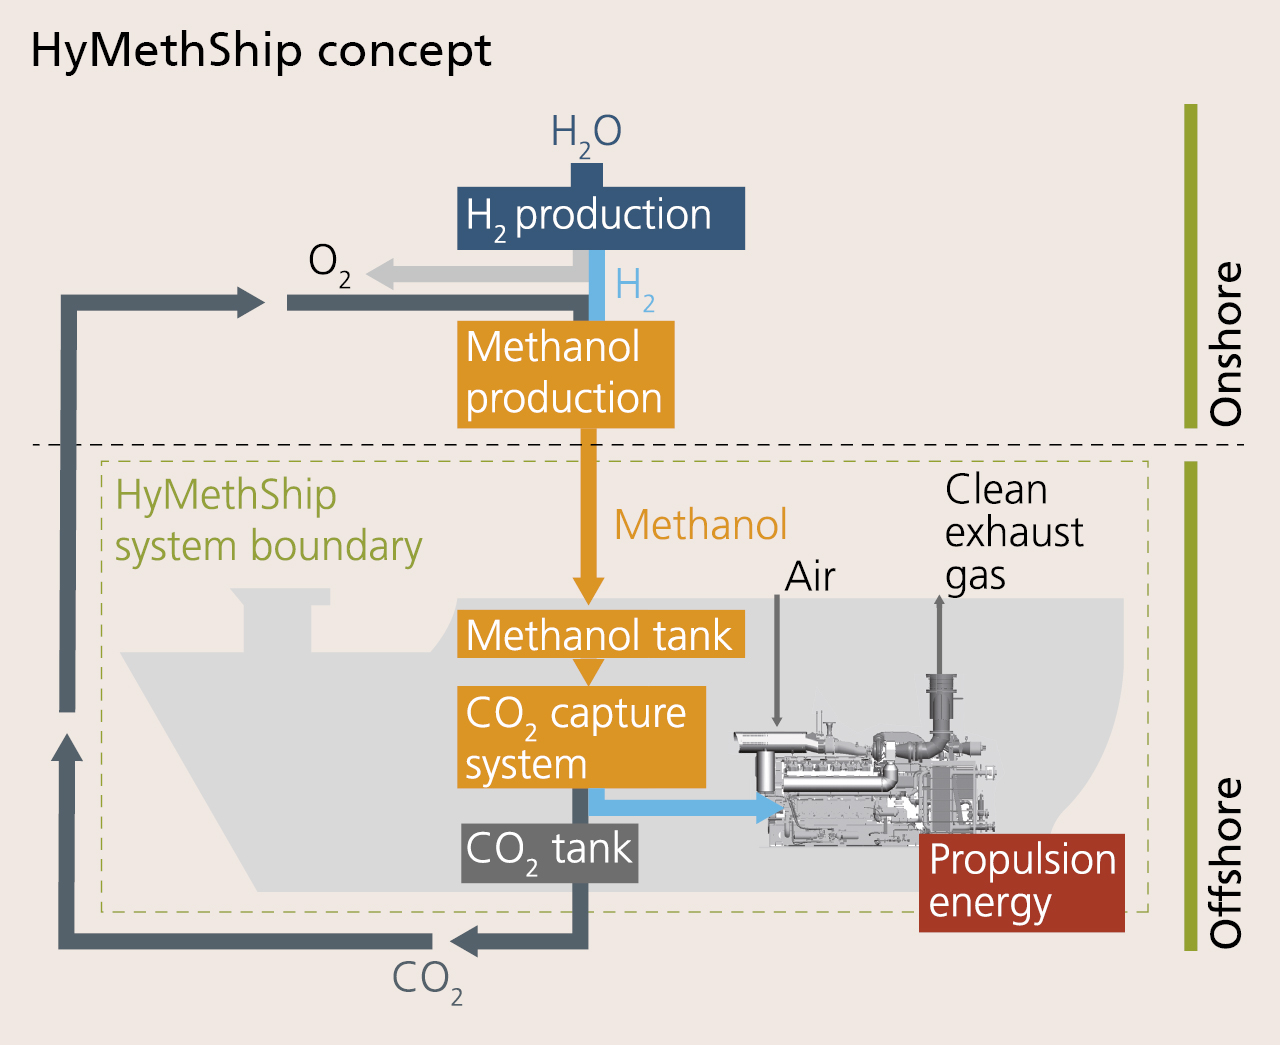 The top part of the graphic shows onshore methanol production. The bottom part shows how hydrogen for the engine is obtained from methanol in the reactor (blue arrow). The remaining CO2 is stored in the tank and reused in onshore methanol production.